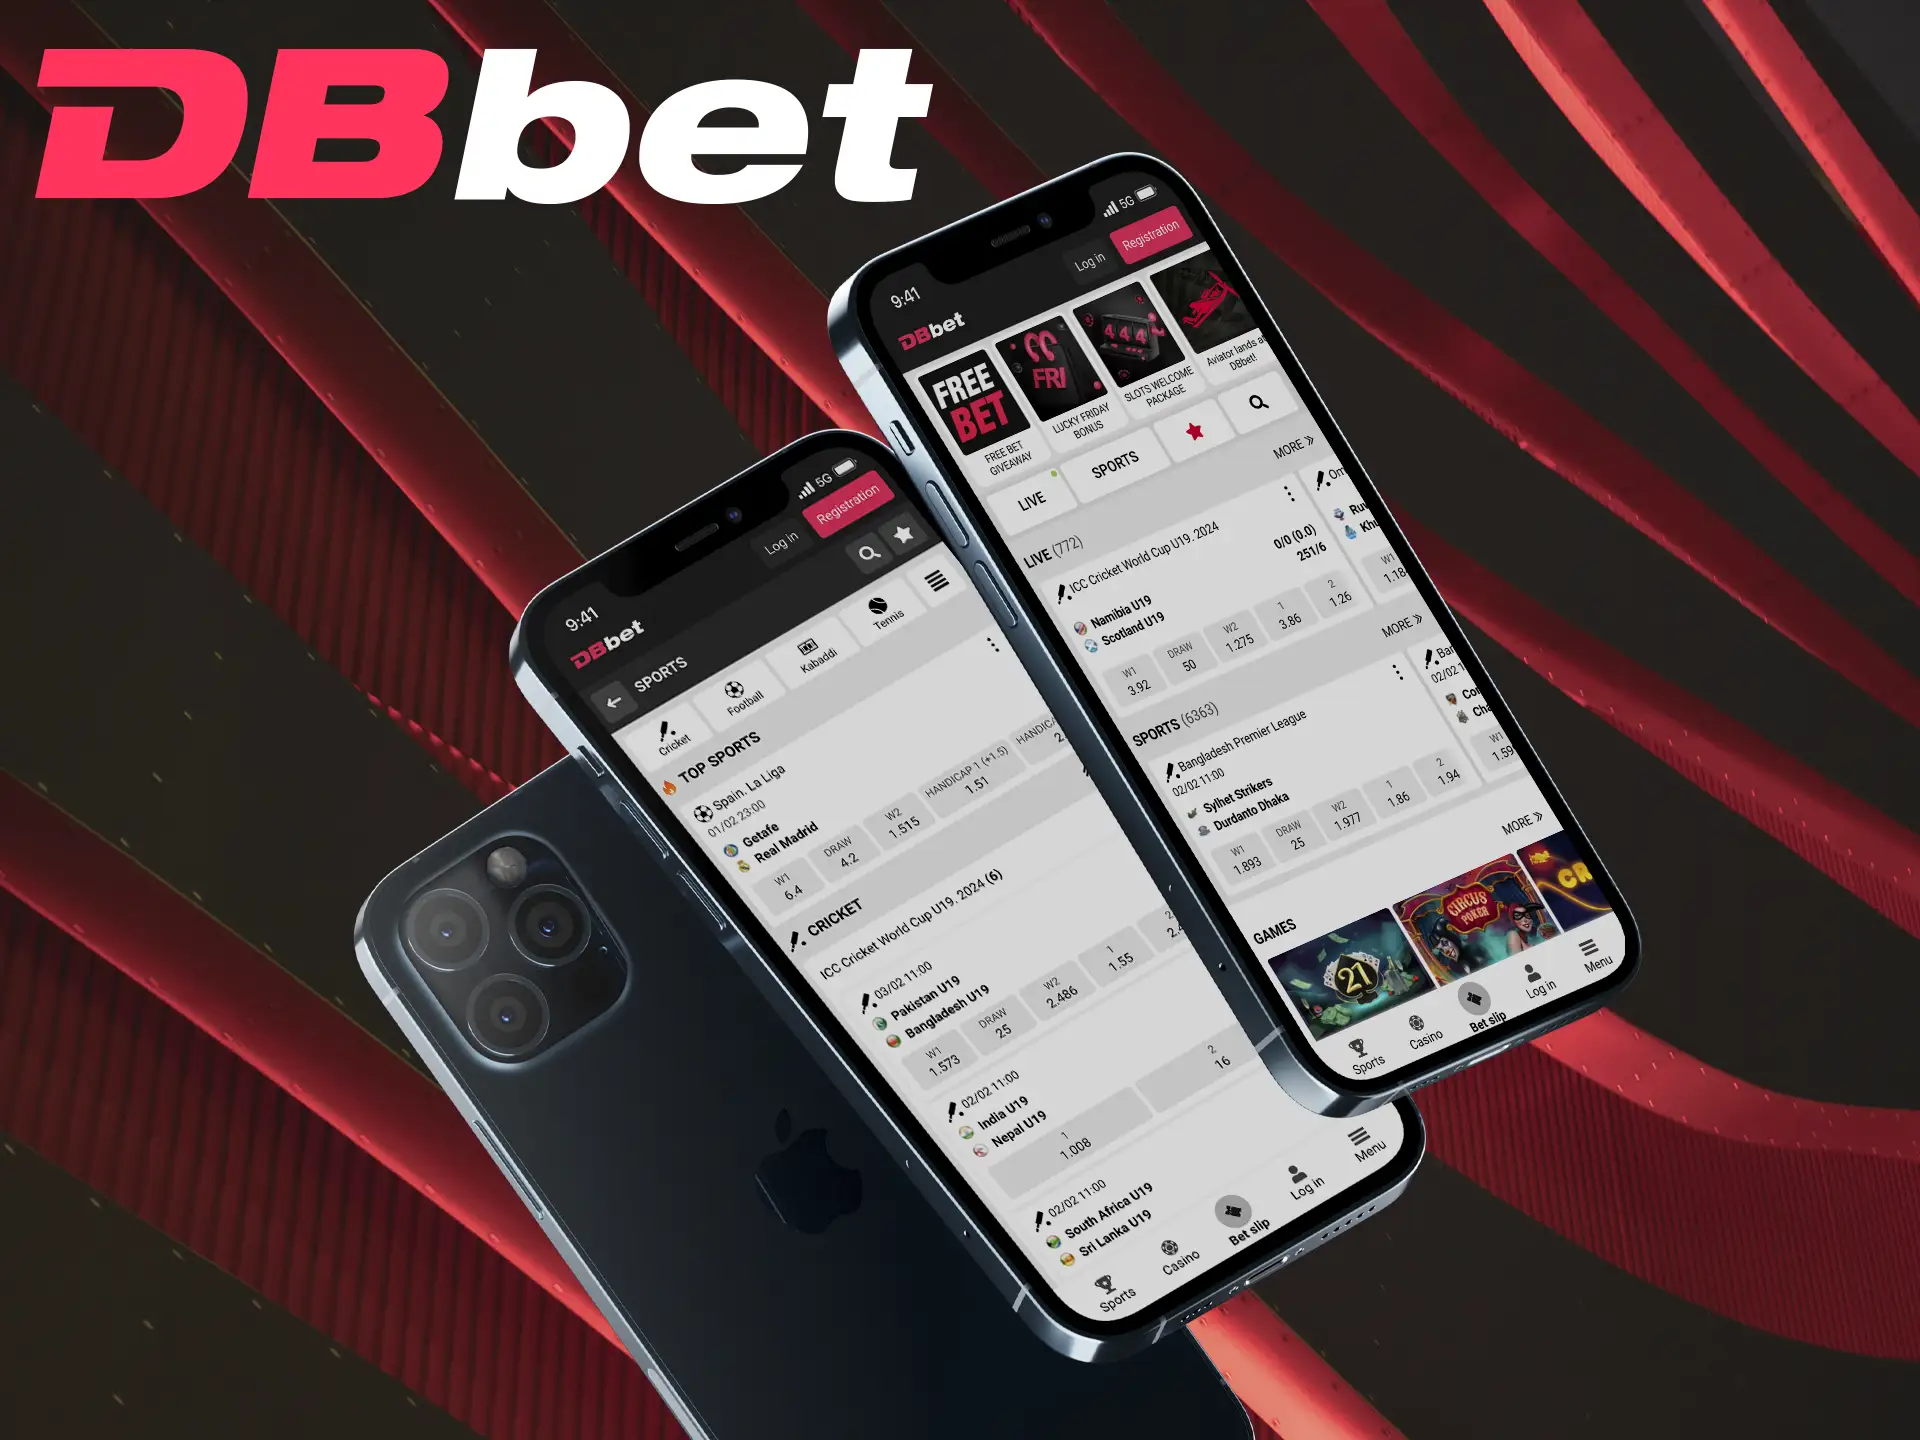 After registering on the Double Bet platform, you will find an abundance of matches on which you can bet in real time.